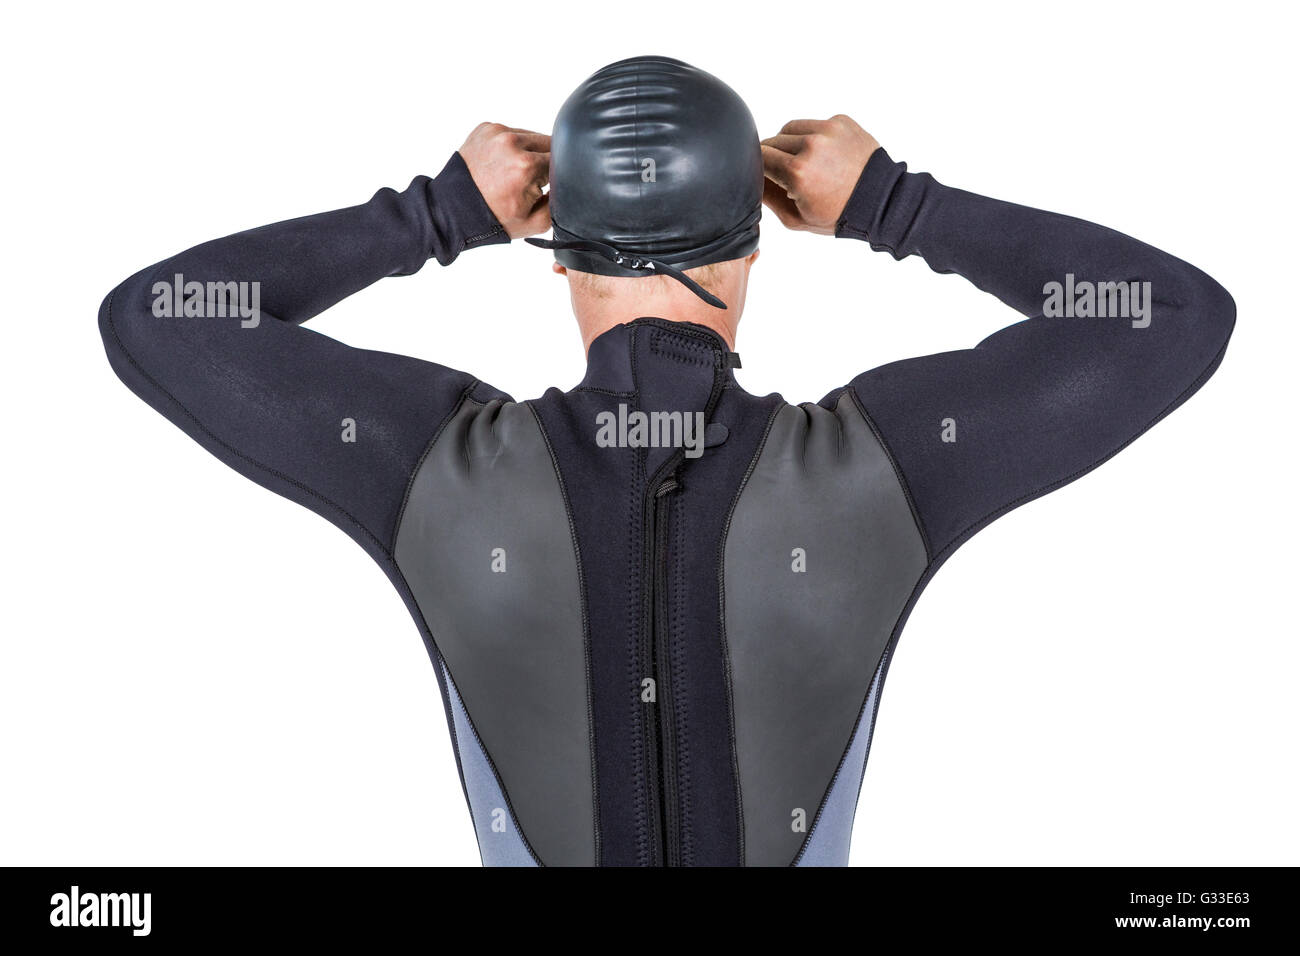 Rear view of swimmer in wetsuit wearing swimming goggles Stock Photo